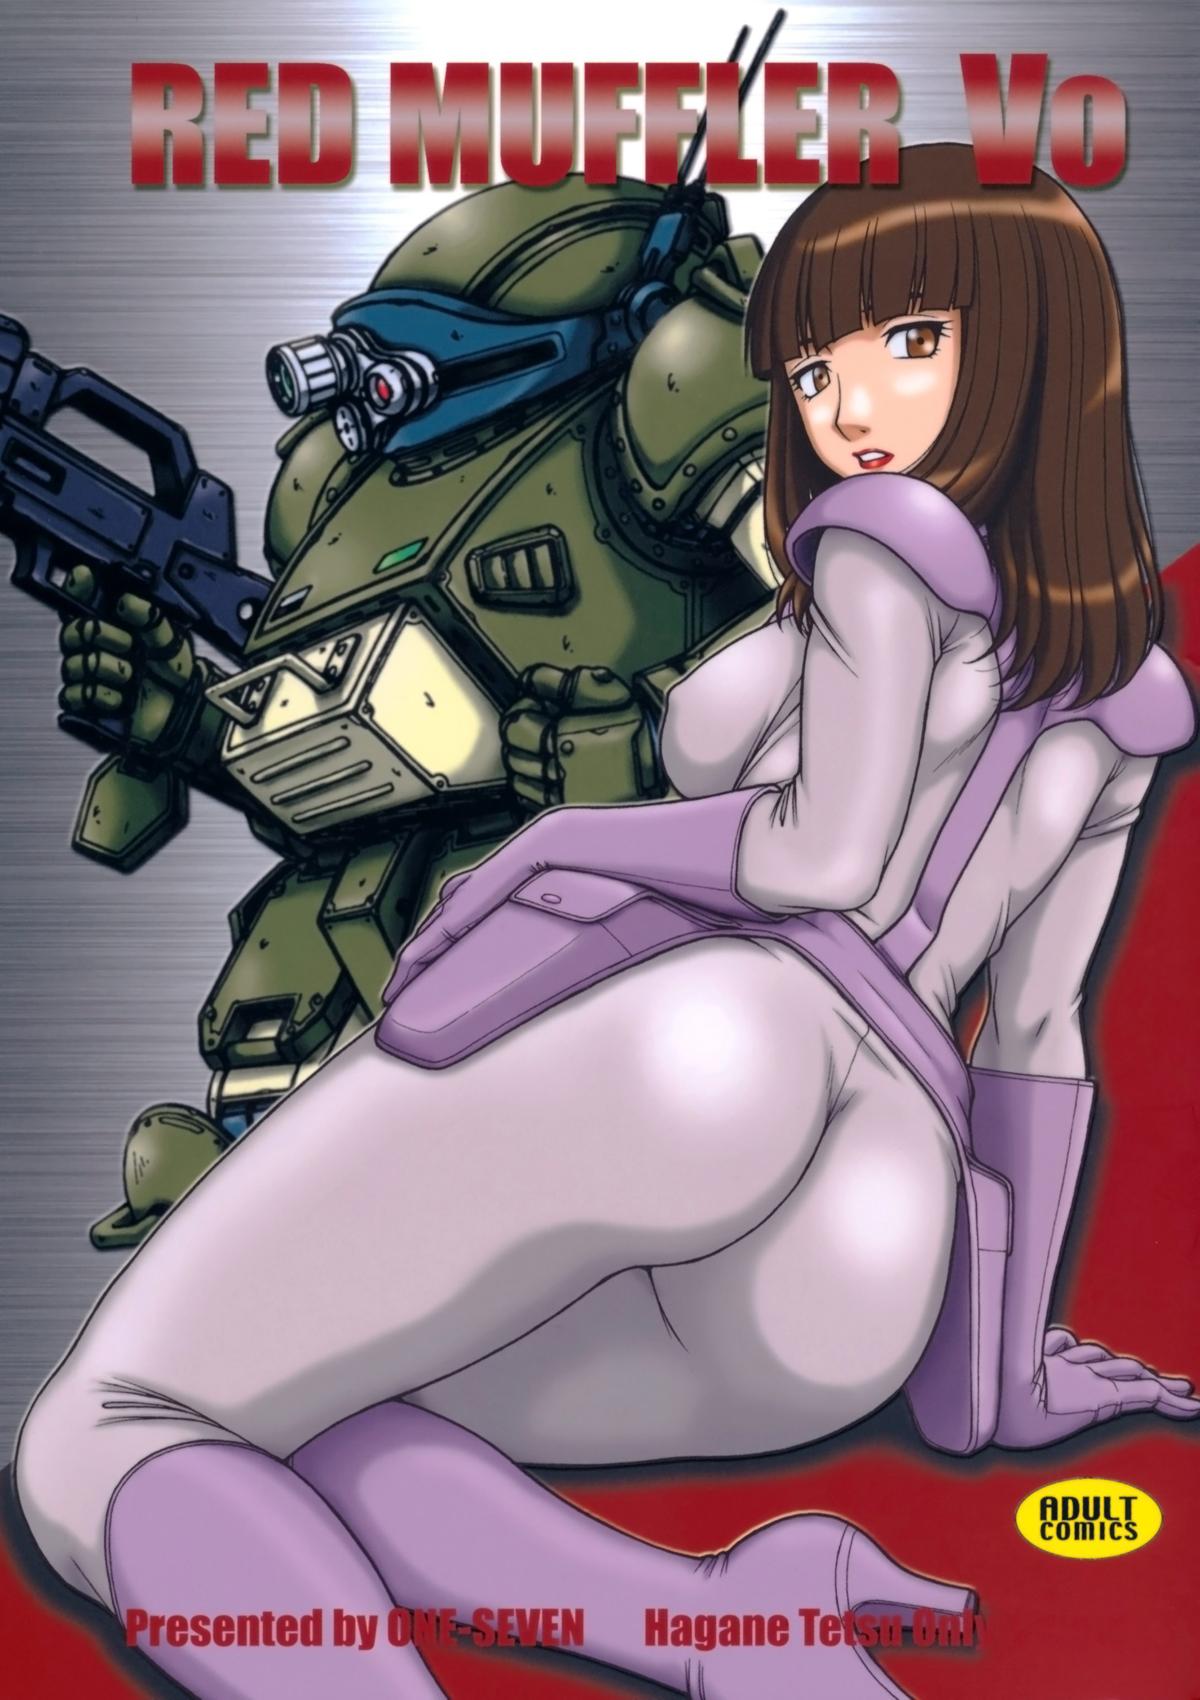 Mediumtits Red Muffler Vo - Armored trooper votoms Free Amature Porn - Picture 1